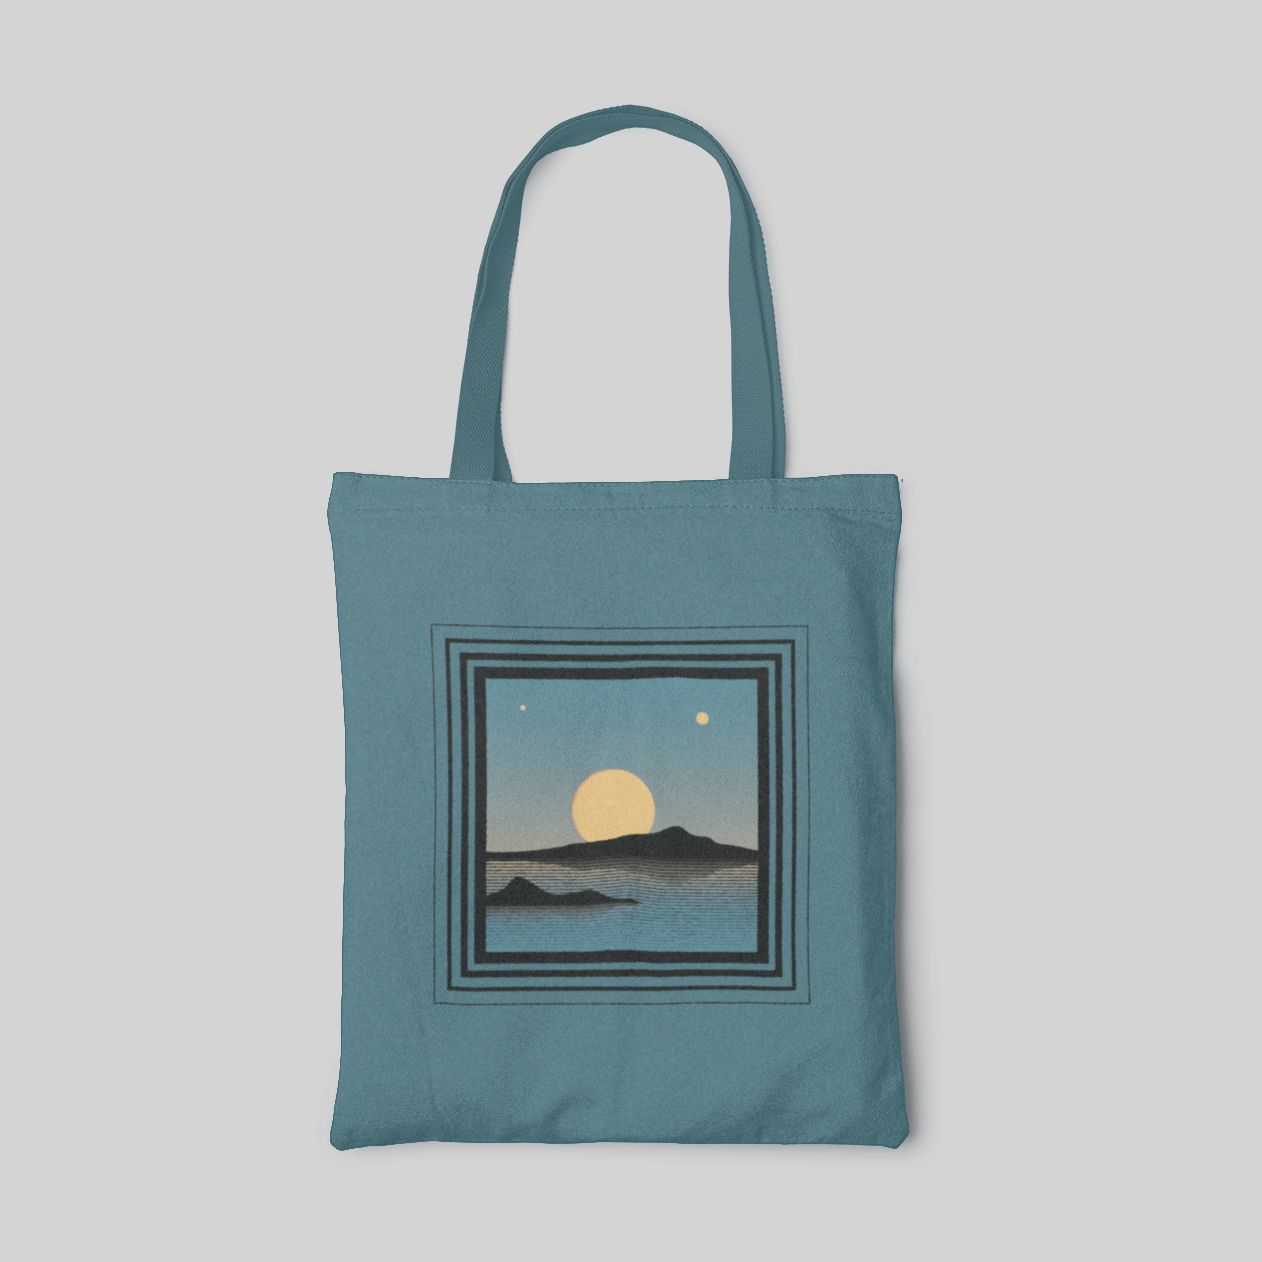 nature theme designed tote bag with greenish blue base and sunset inside 4 square frames, front side